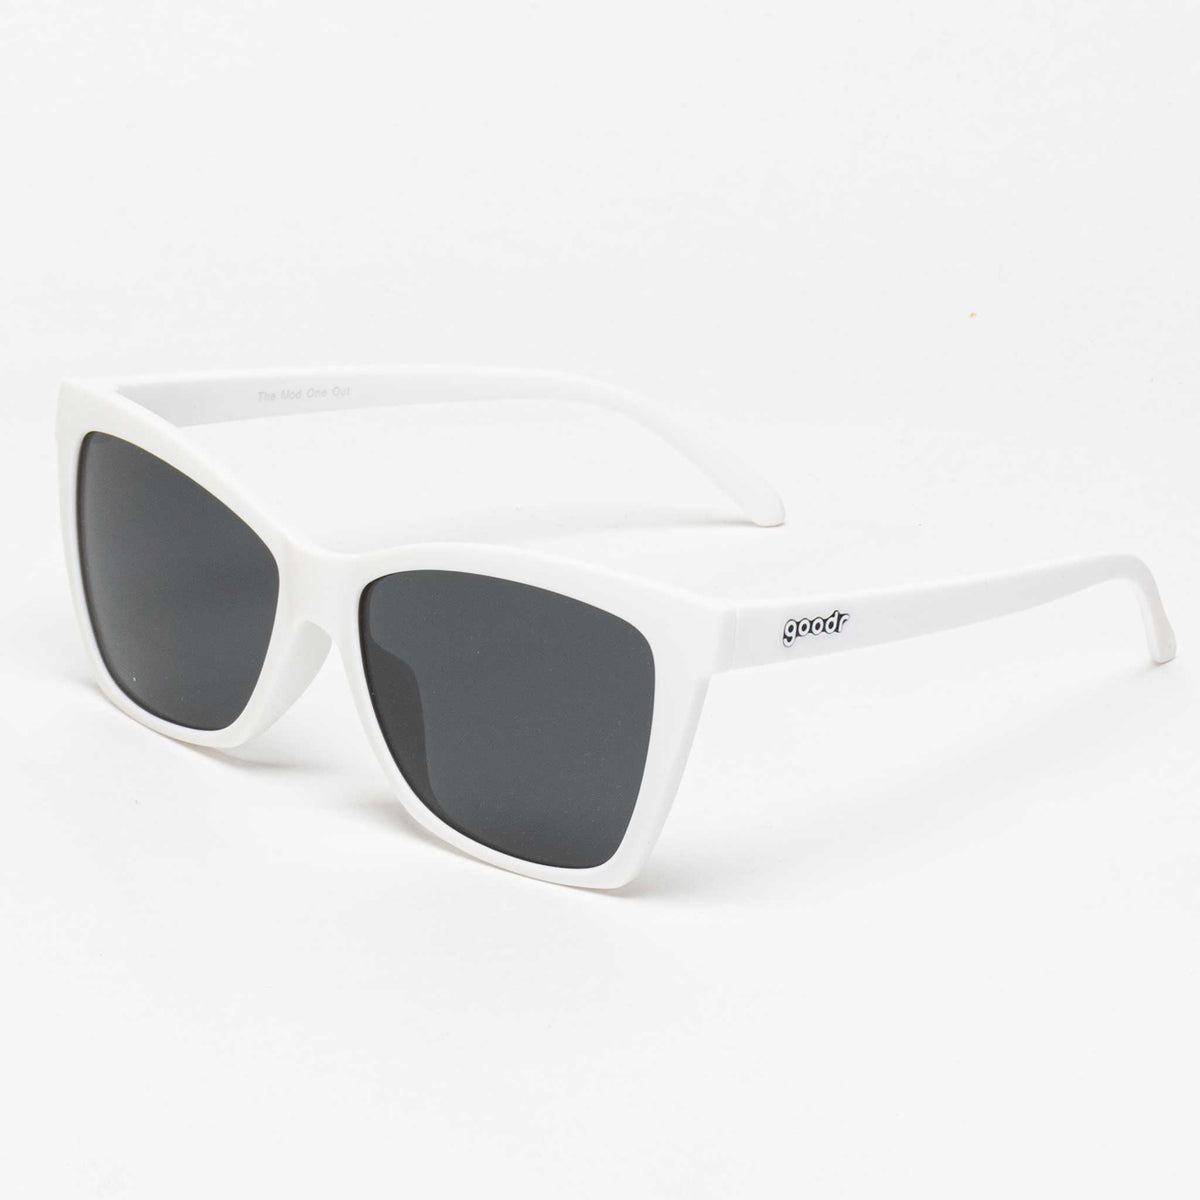 Pop G Sunglasses, Goodr, Unisex, The Mod One Out